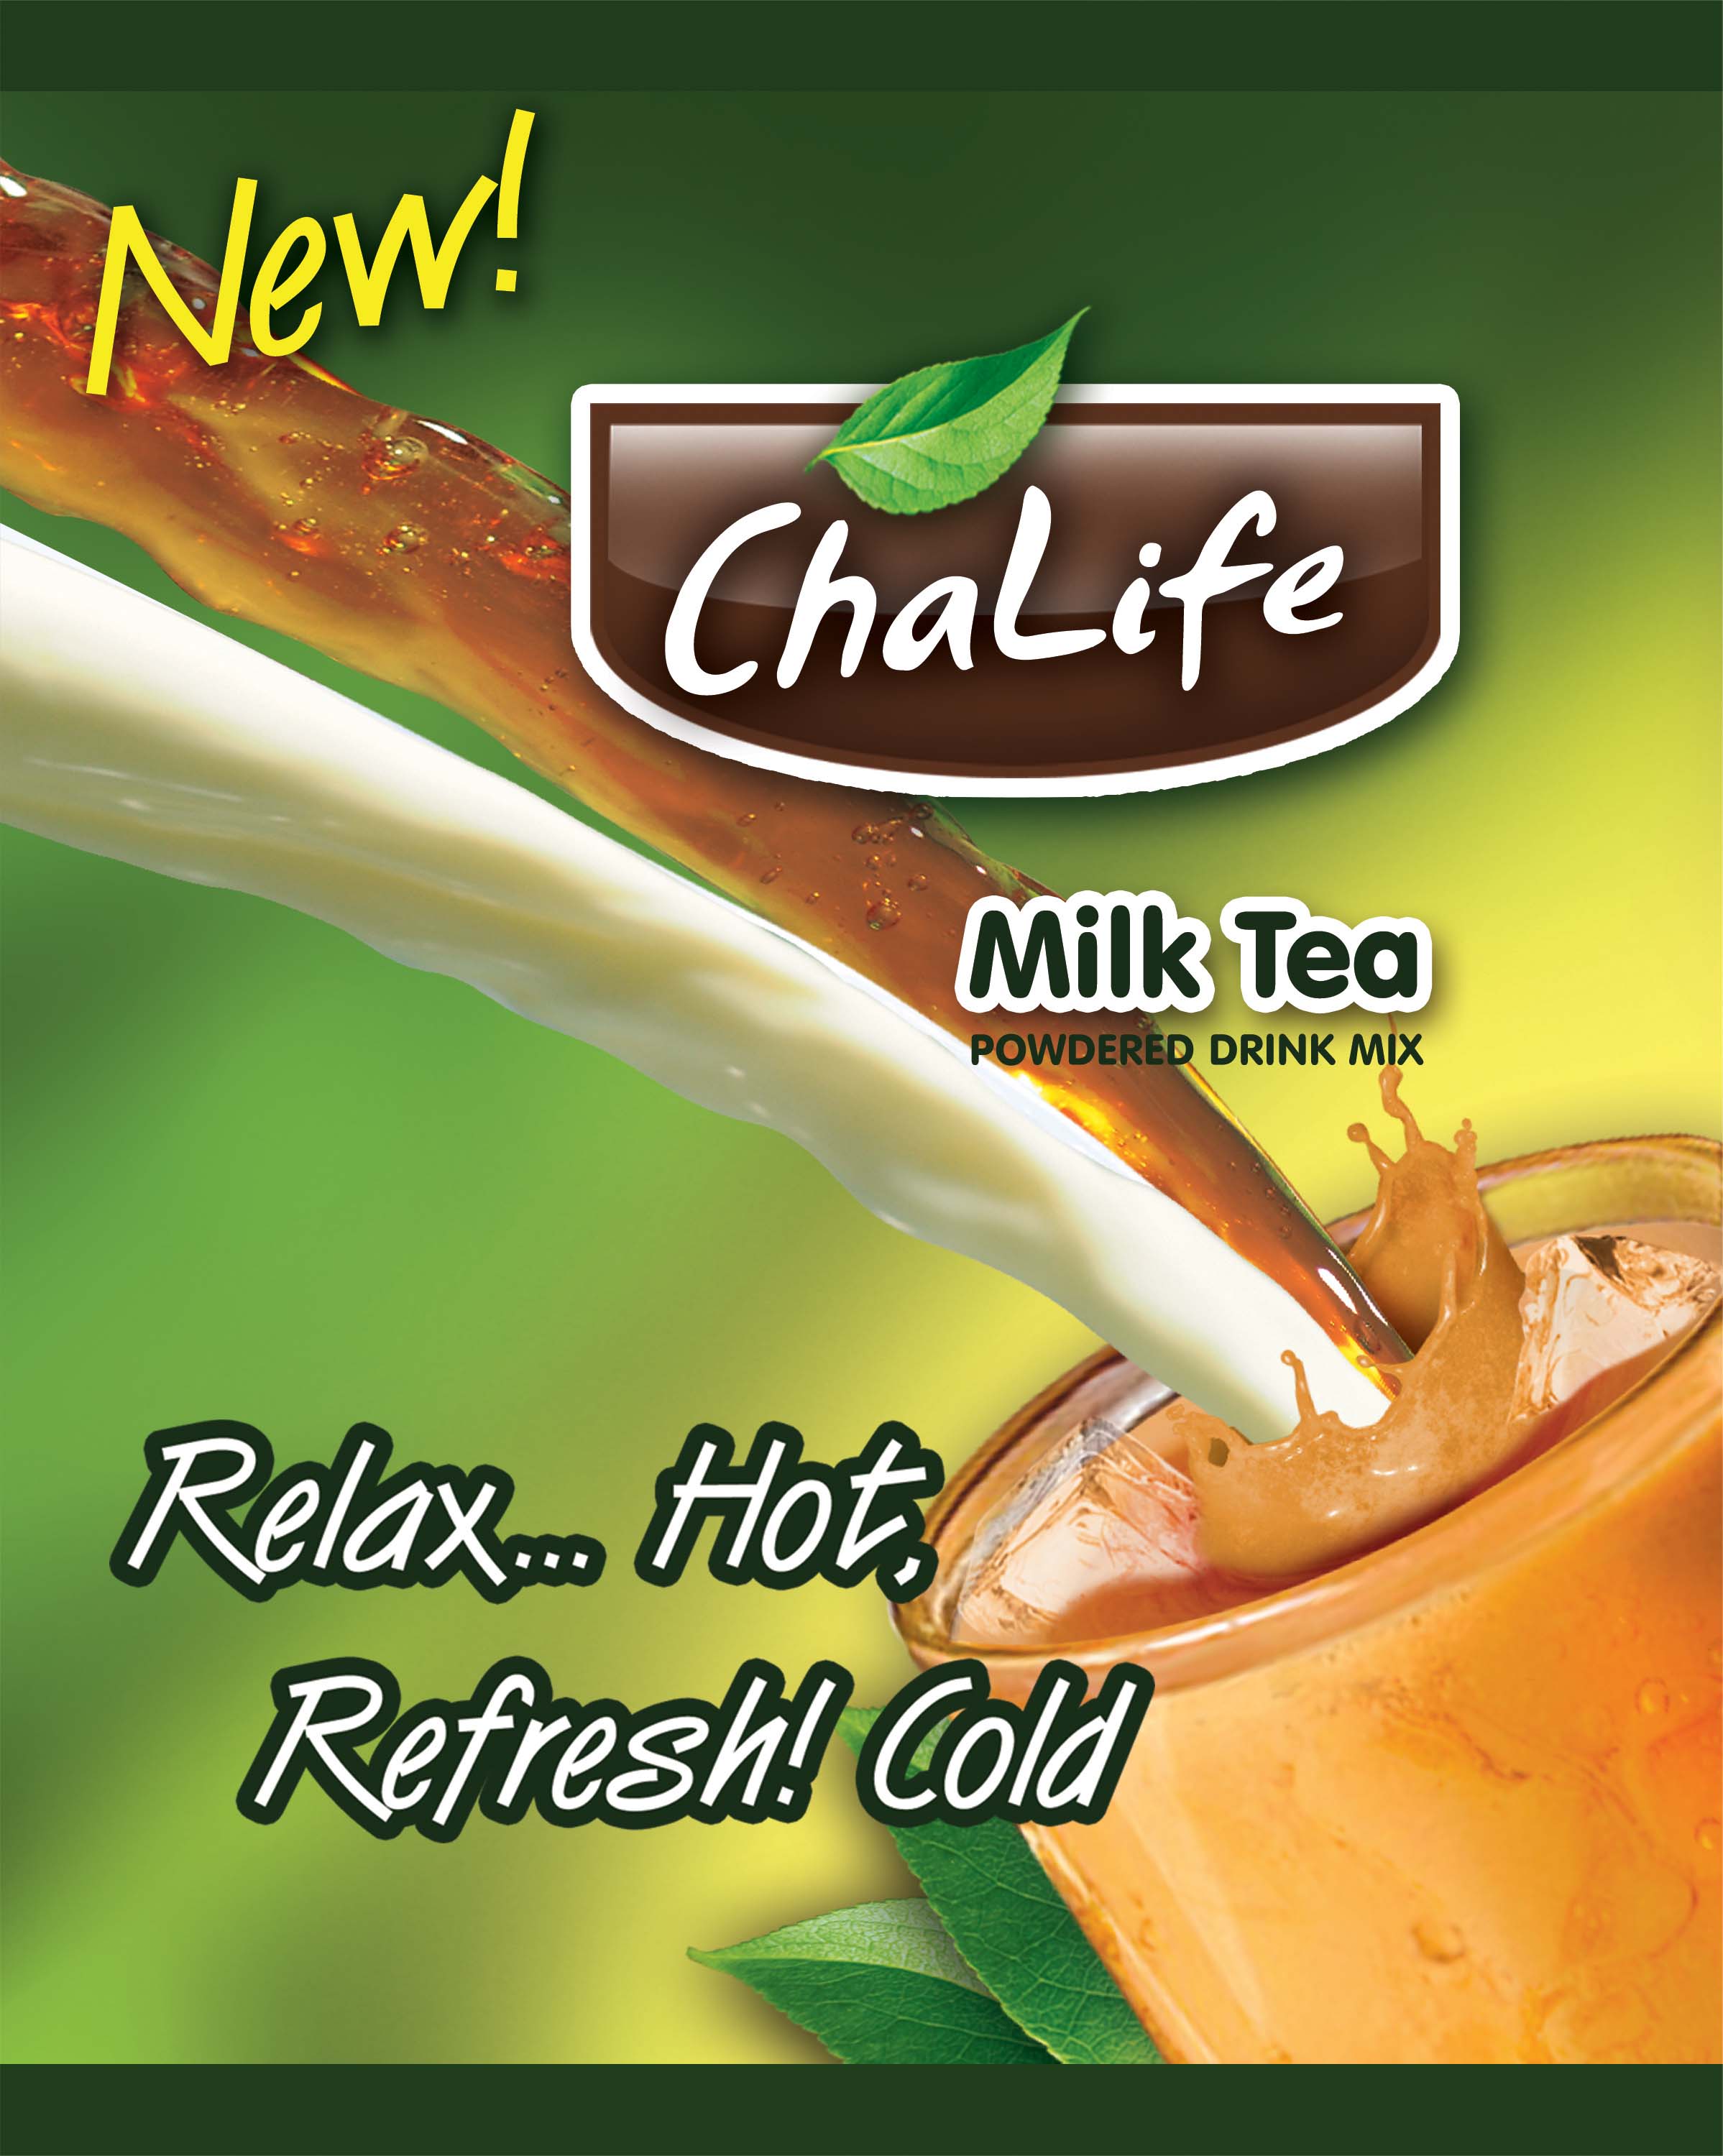 ChaLife Milk Tea one way to be refreshed and relaxed